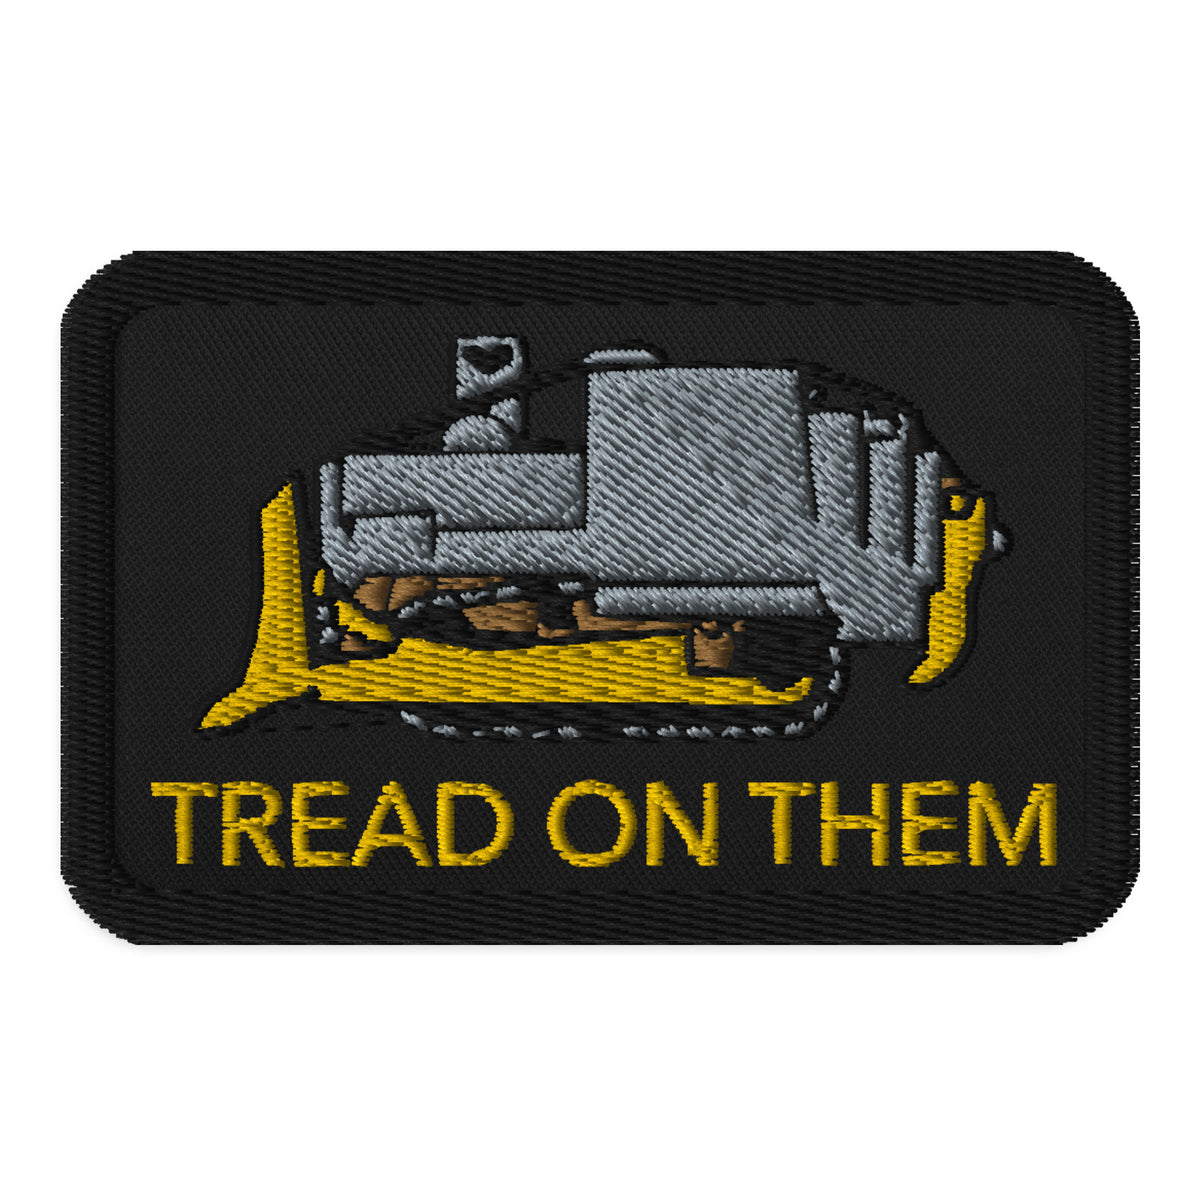 Tread On Them Killdozer Embroidered Morale Patch